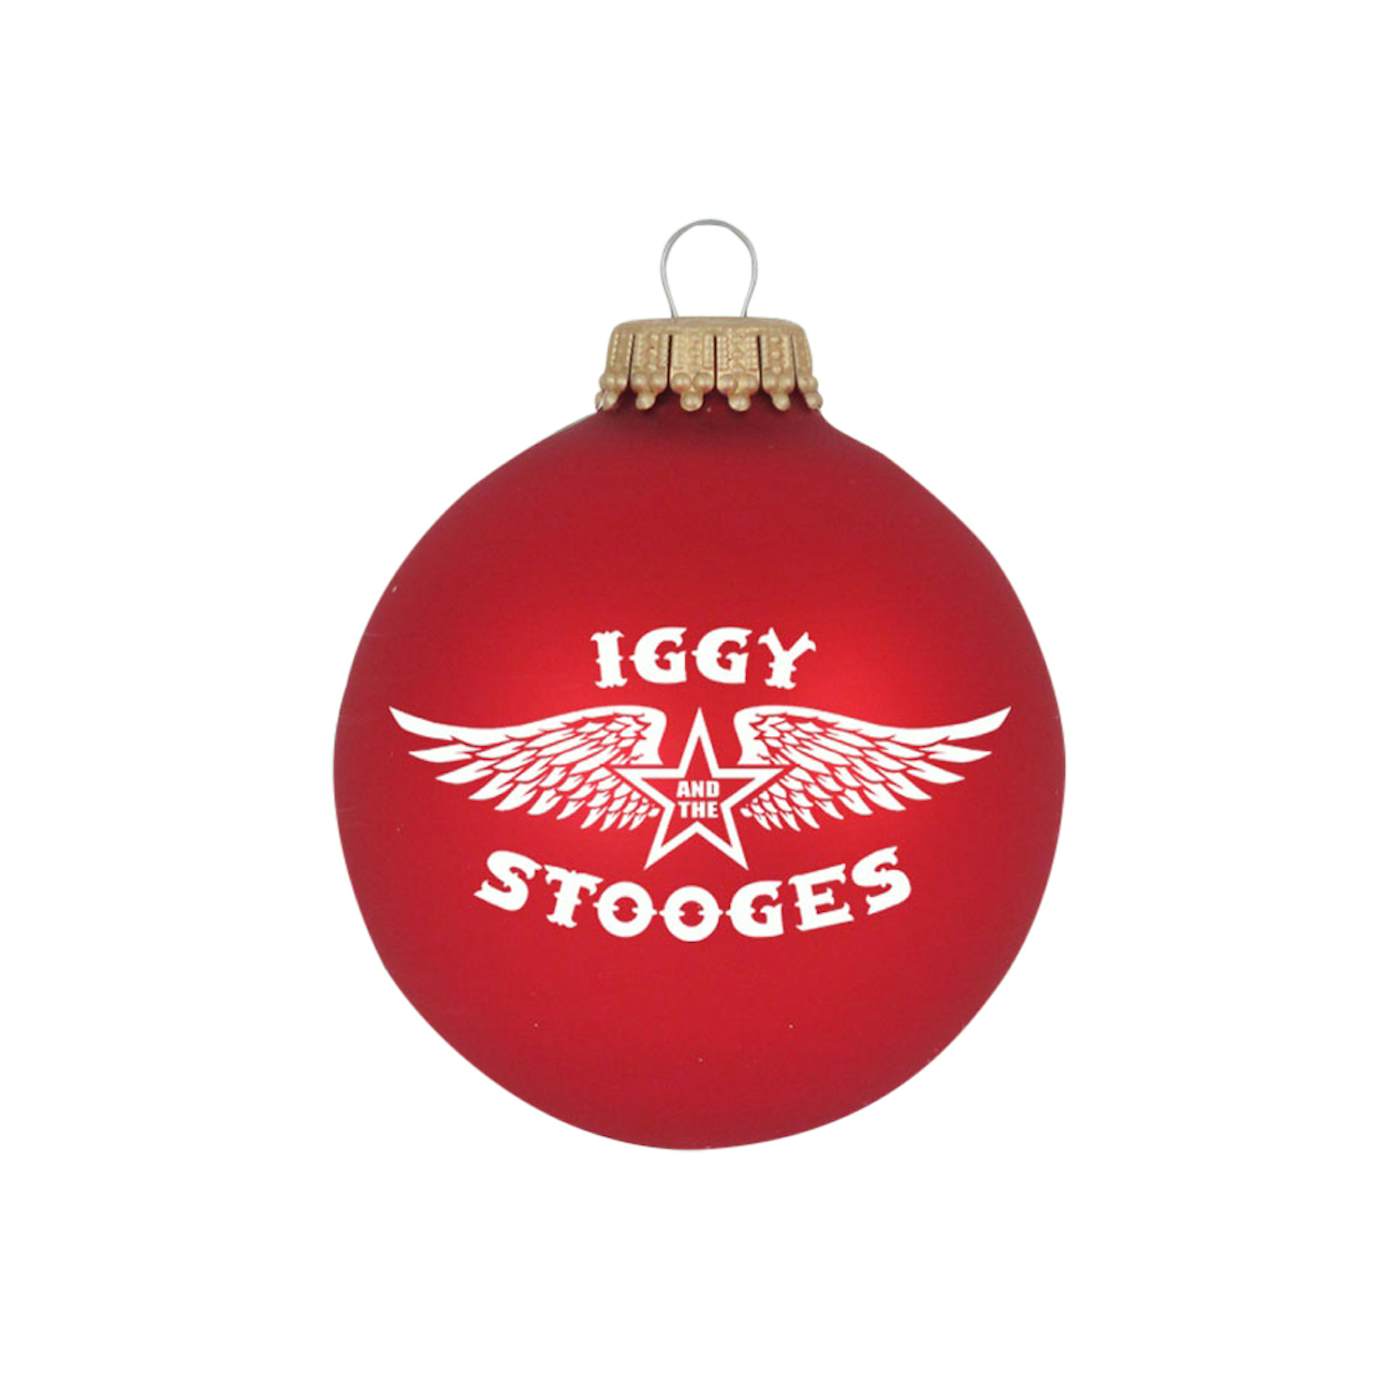 Iggy and the Stooges ® Wings 3 1/4" Glass Ornament